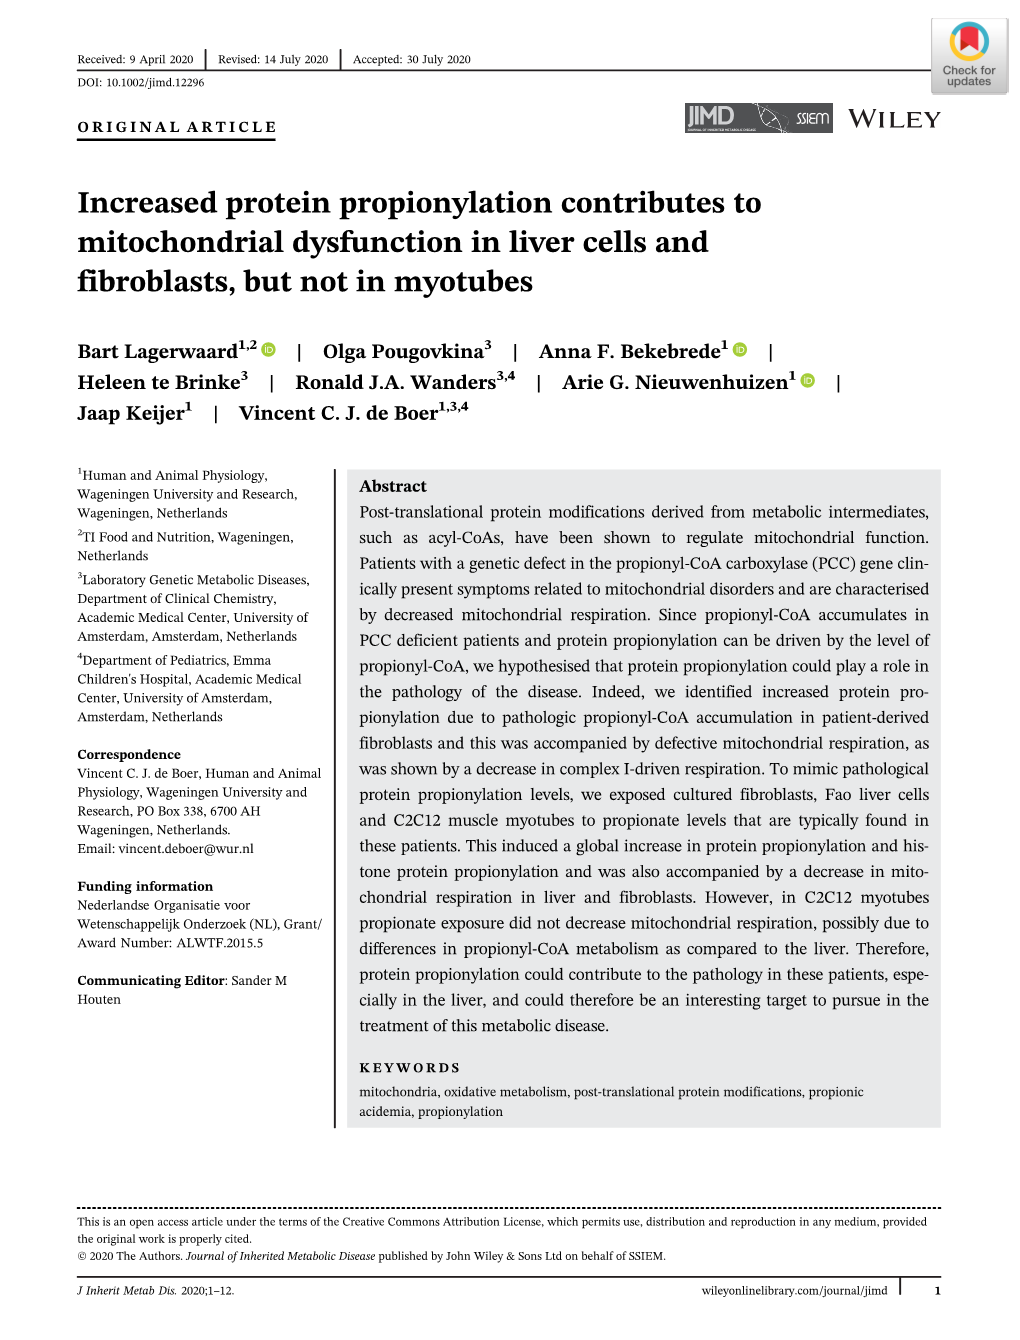 Increased Protein Propionylation Contributes to Mitochondrial Dysfunction in Liver Cells and Fibroblasts, but Not in Myotubes